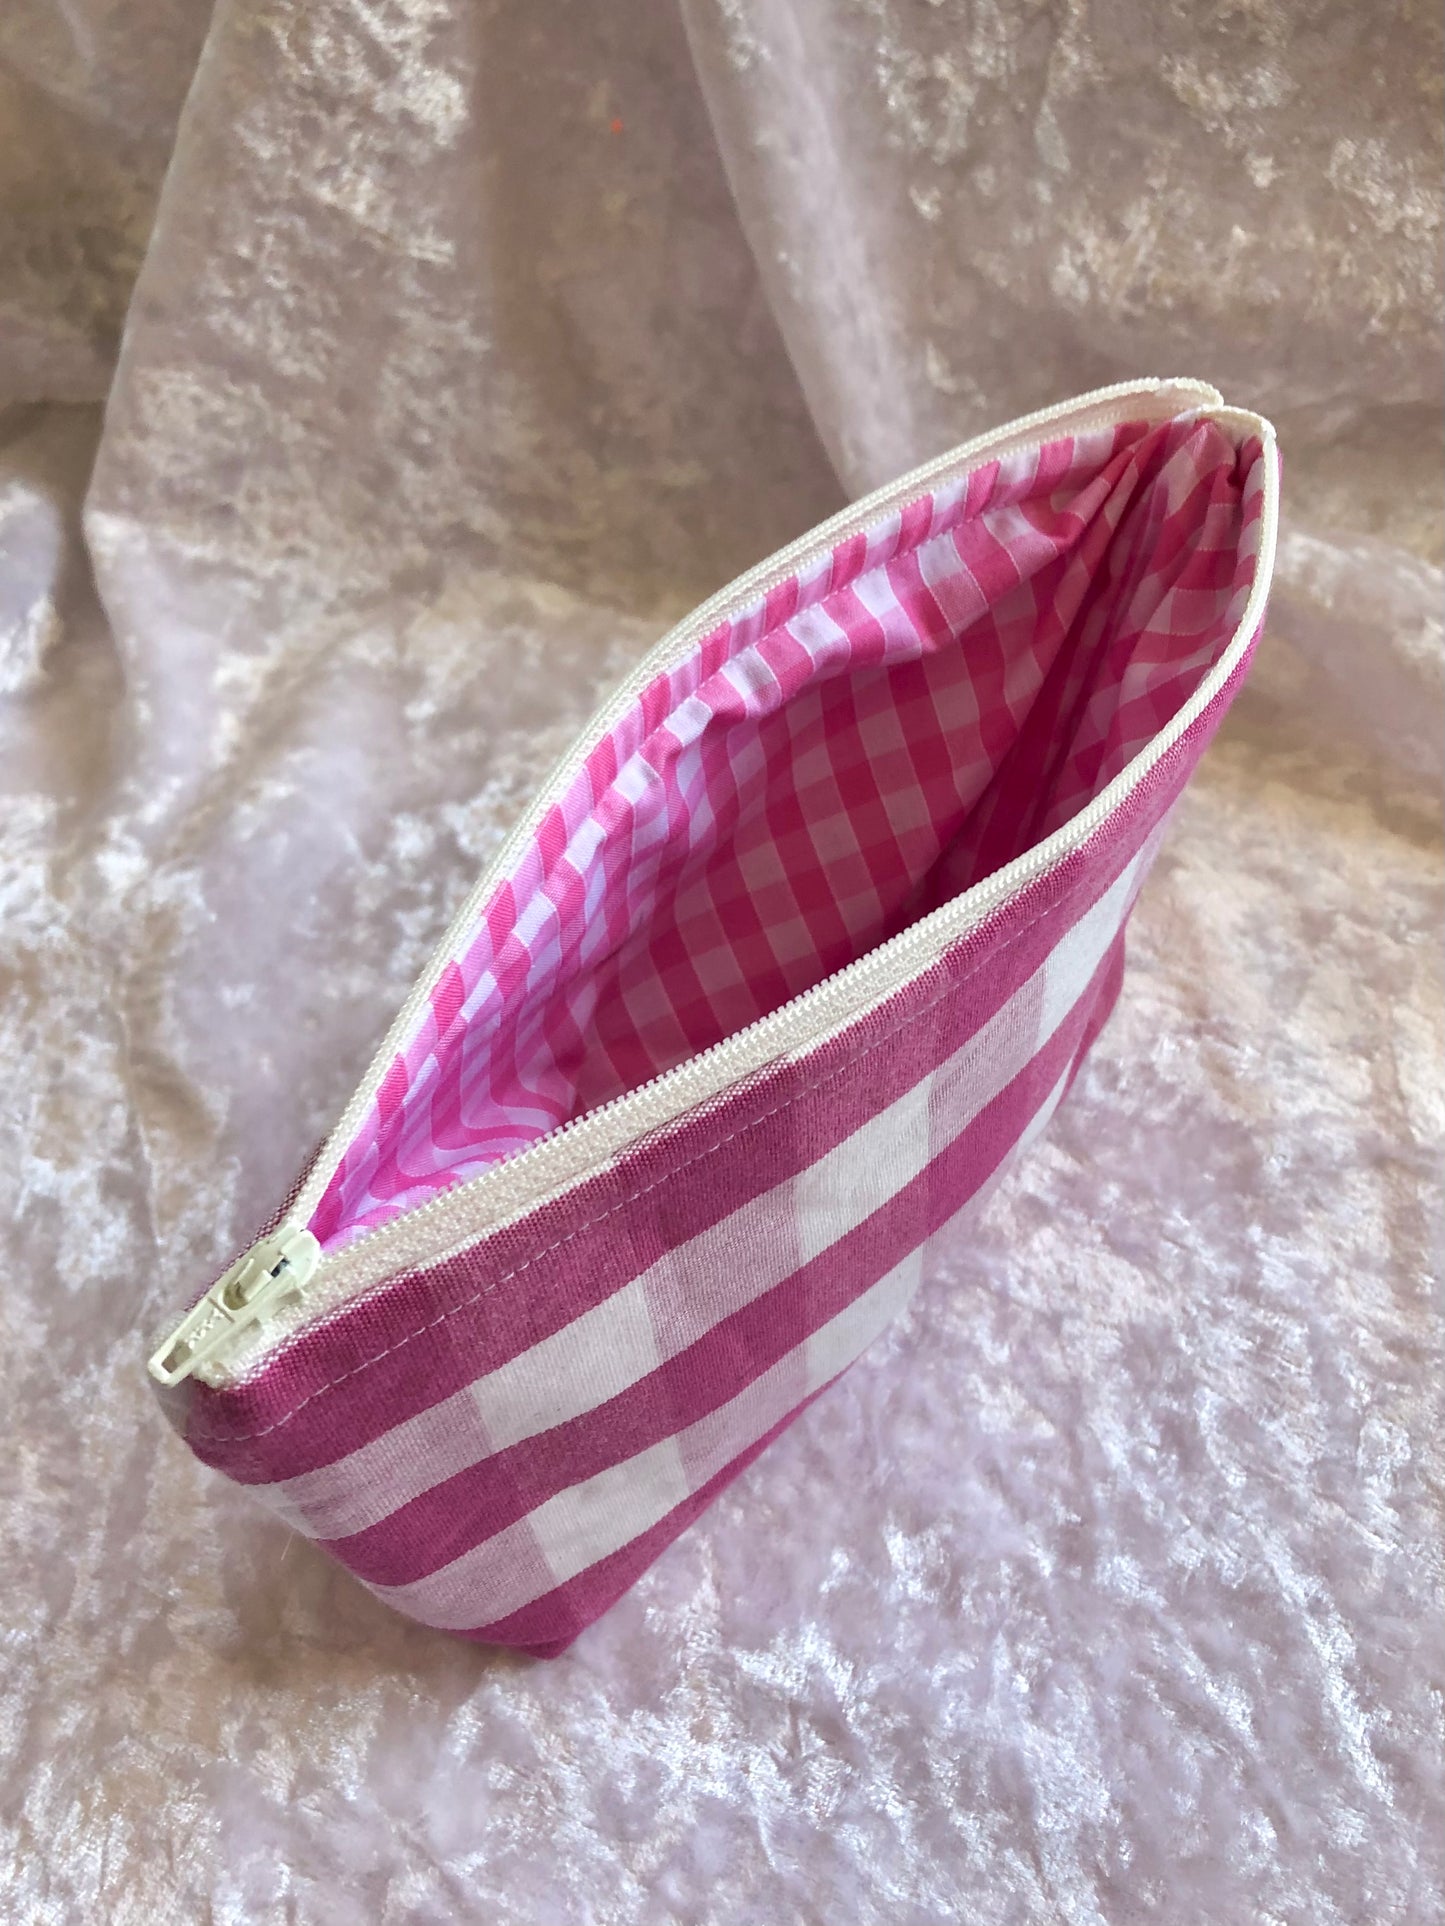 Raspberry Gingham zipped pouch/make up bag